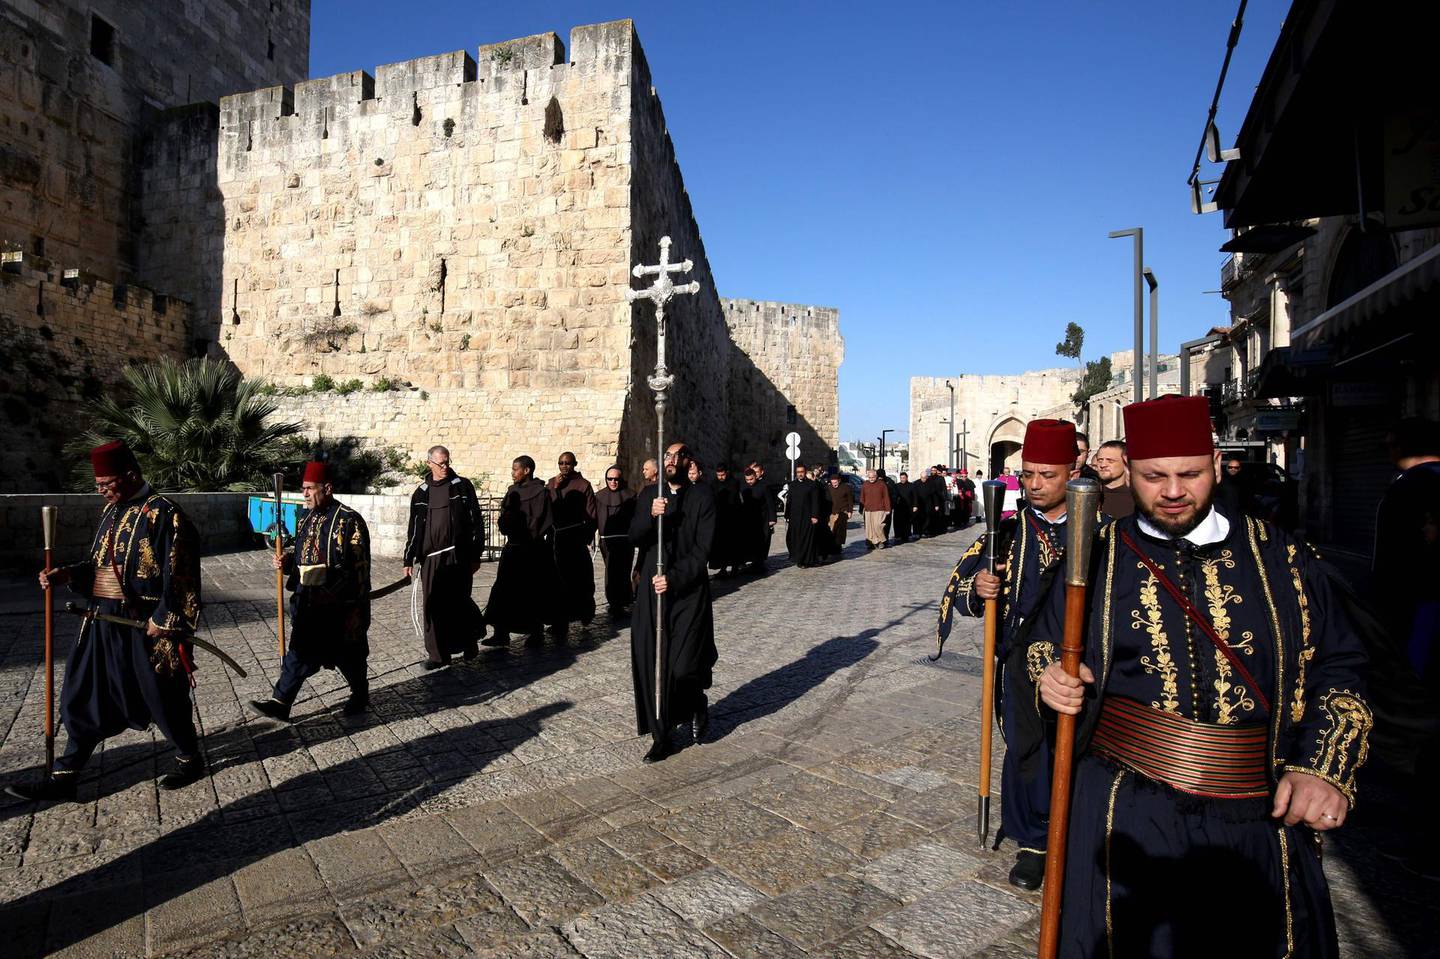 Kawases in traditional Ottoman outfits lead a procession of Roman Catholic clergymen on Holy Thursday (Maundy Thursday) outside the Church of the Holy Sepulchre in Jerusalem's Old City on April 18, 2019, traditionally believed to be the site of Christ's crucifixion and resurrection. / AFP / GALI TIBBON
